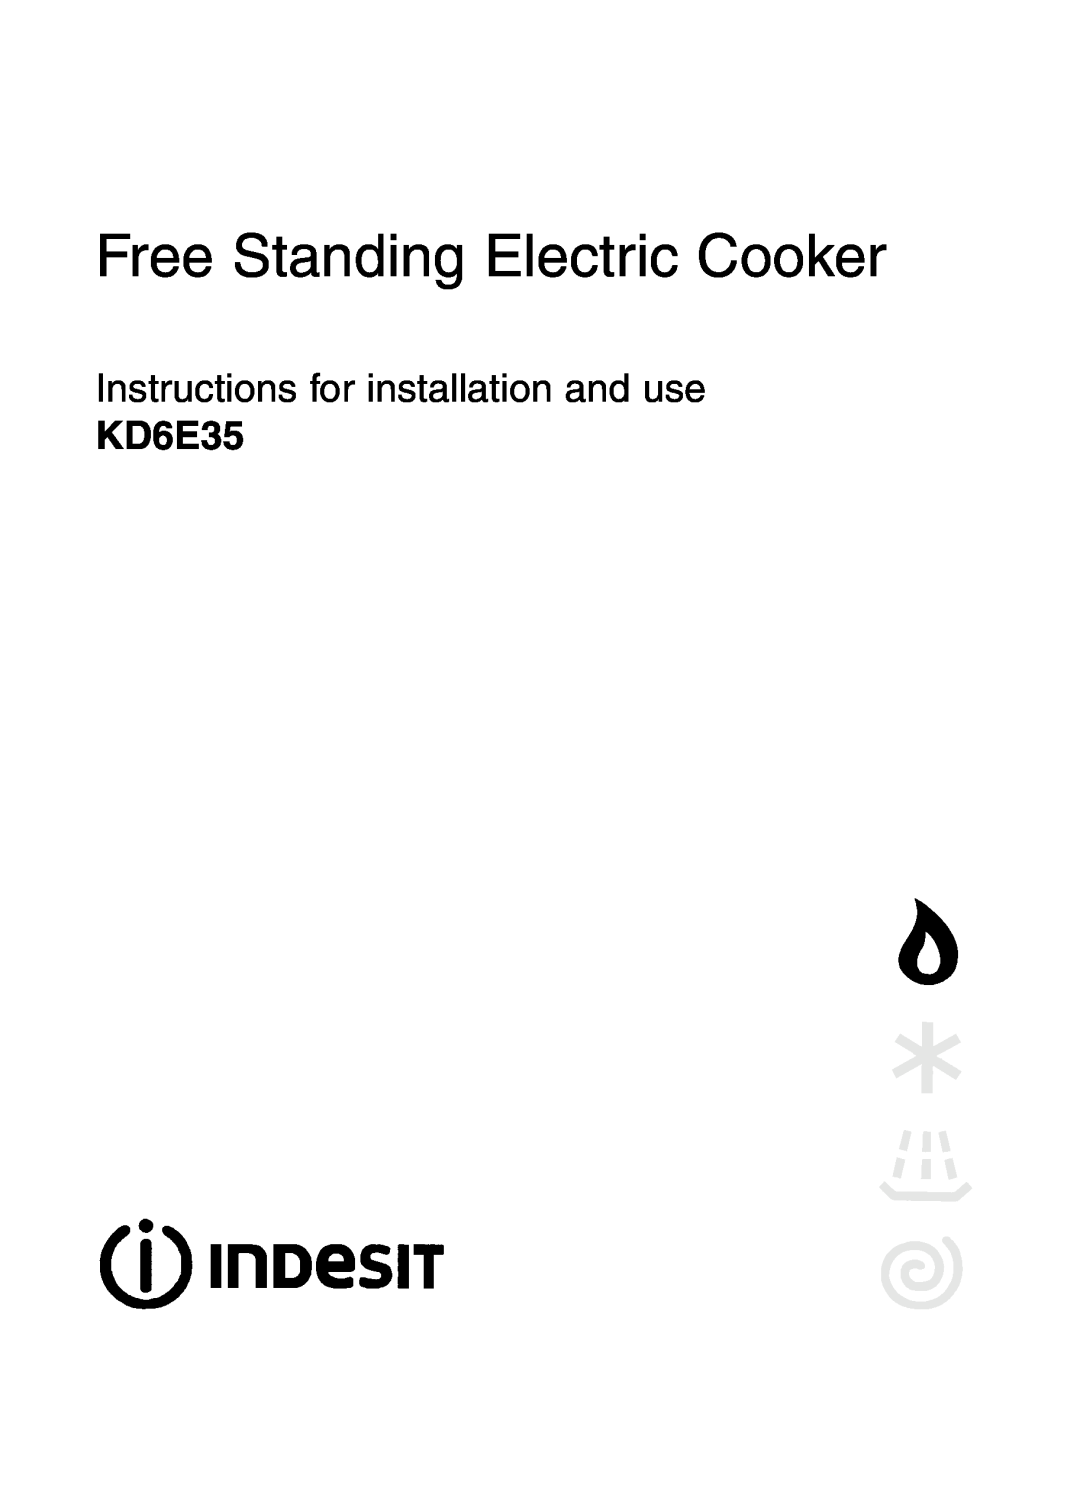 Indesit KD6E35W manual Free Standing Electric Cooker, Instructions for installation and use 